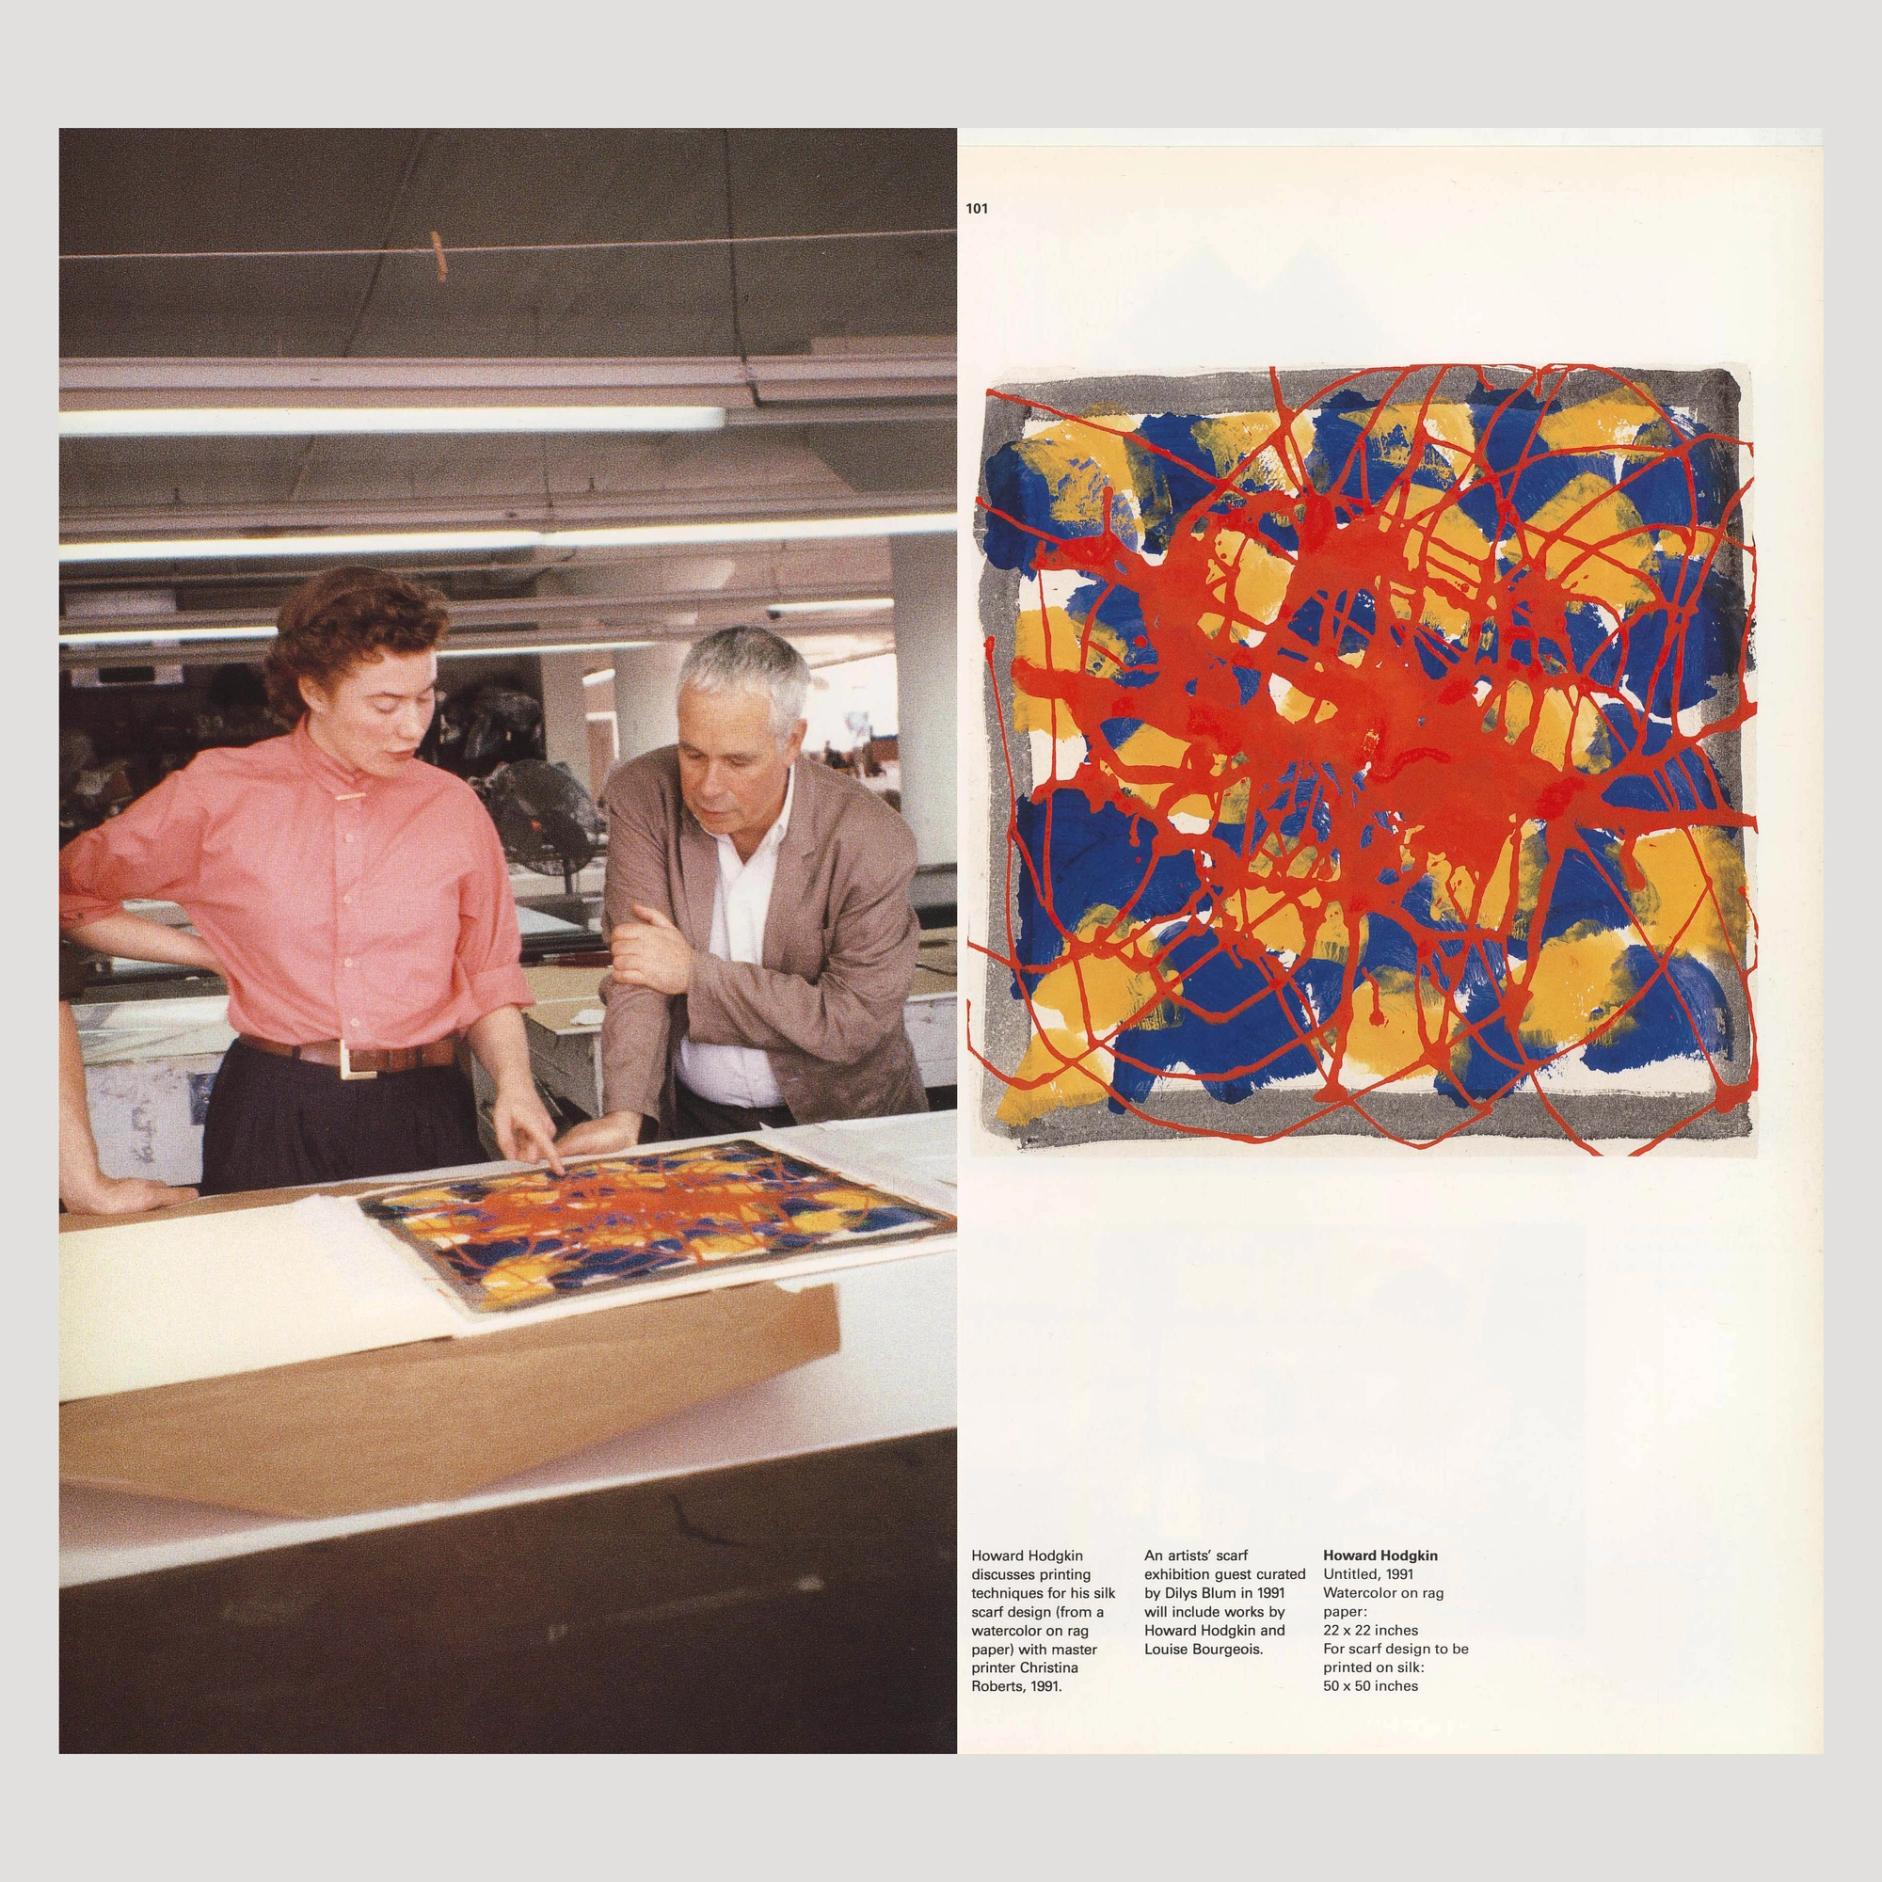 A spread of a book where on the left there are two artists discussing an artwork that is laying on a table in a studio, and on the right is the abstract watercolor design the artists are discussing.